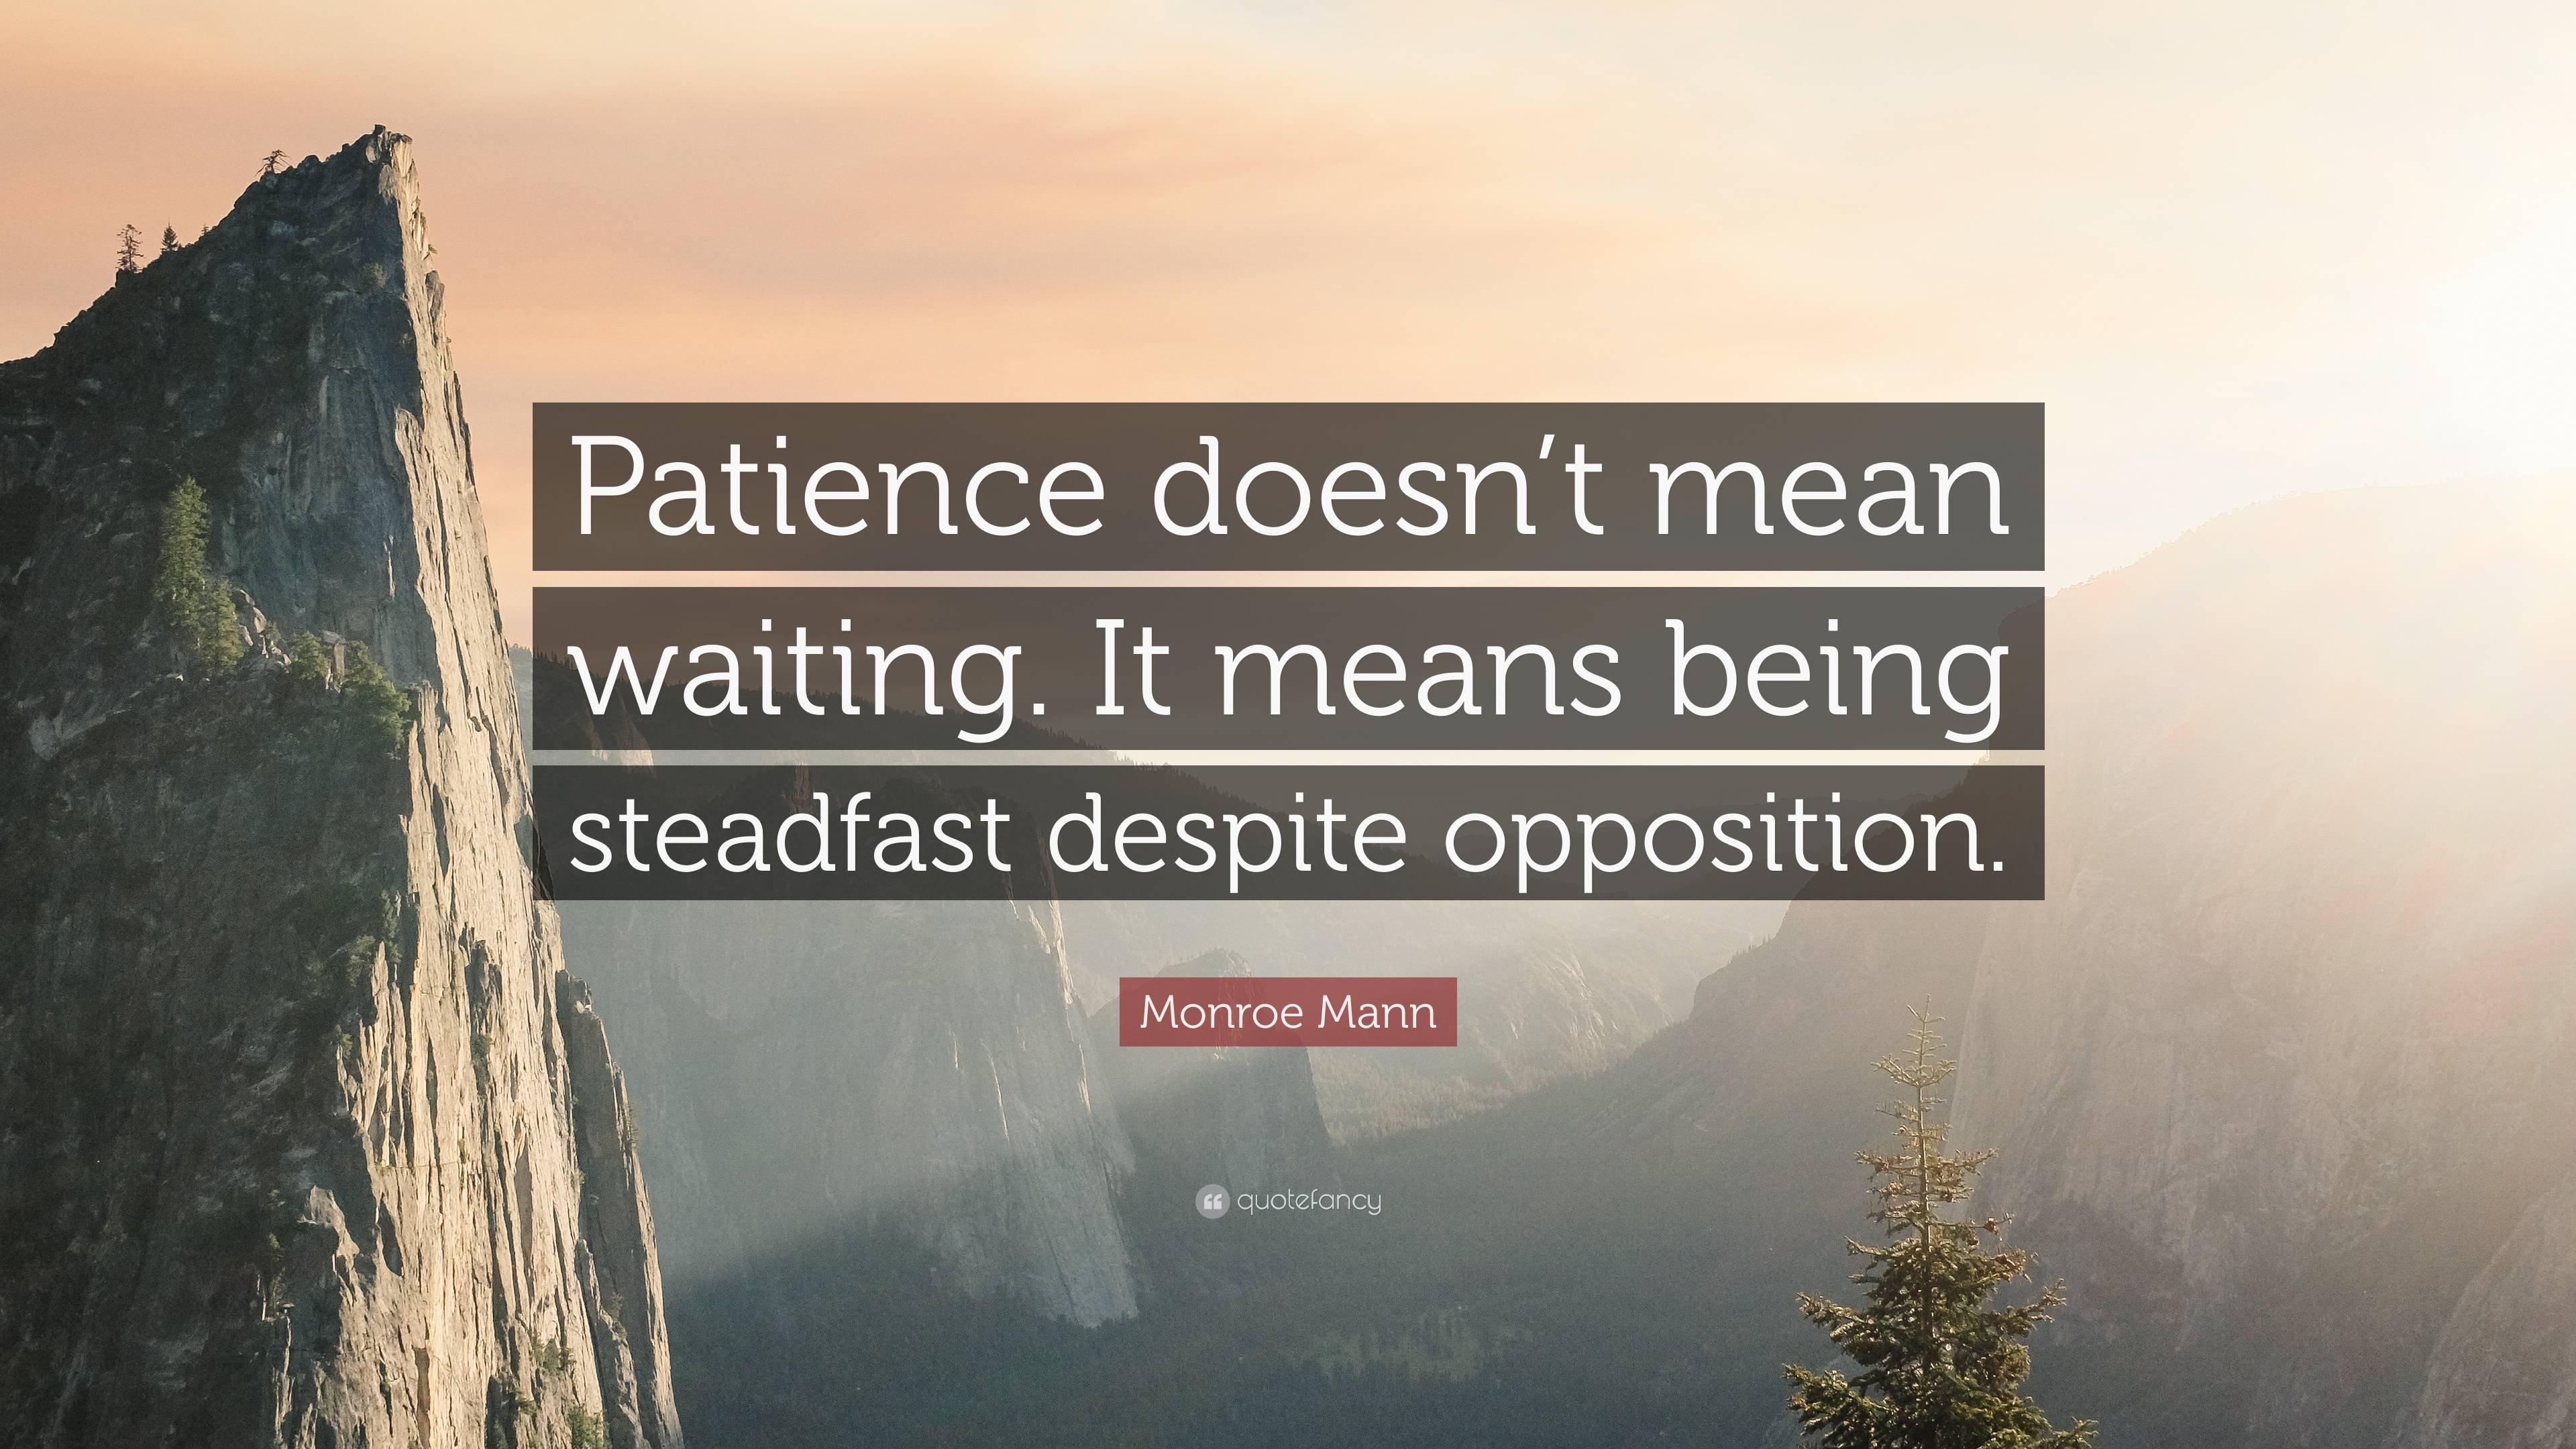 Monroe Mann Quote: “Patience doesn't mean waiting. It means being steadfast  despite opposition.”